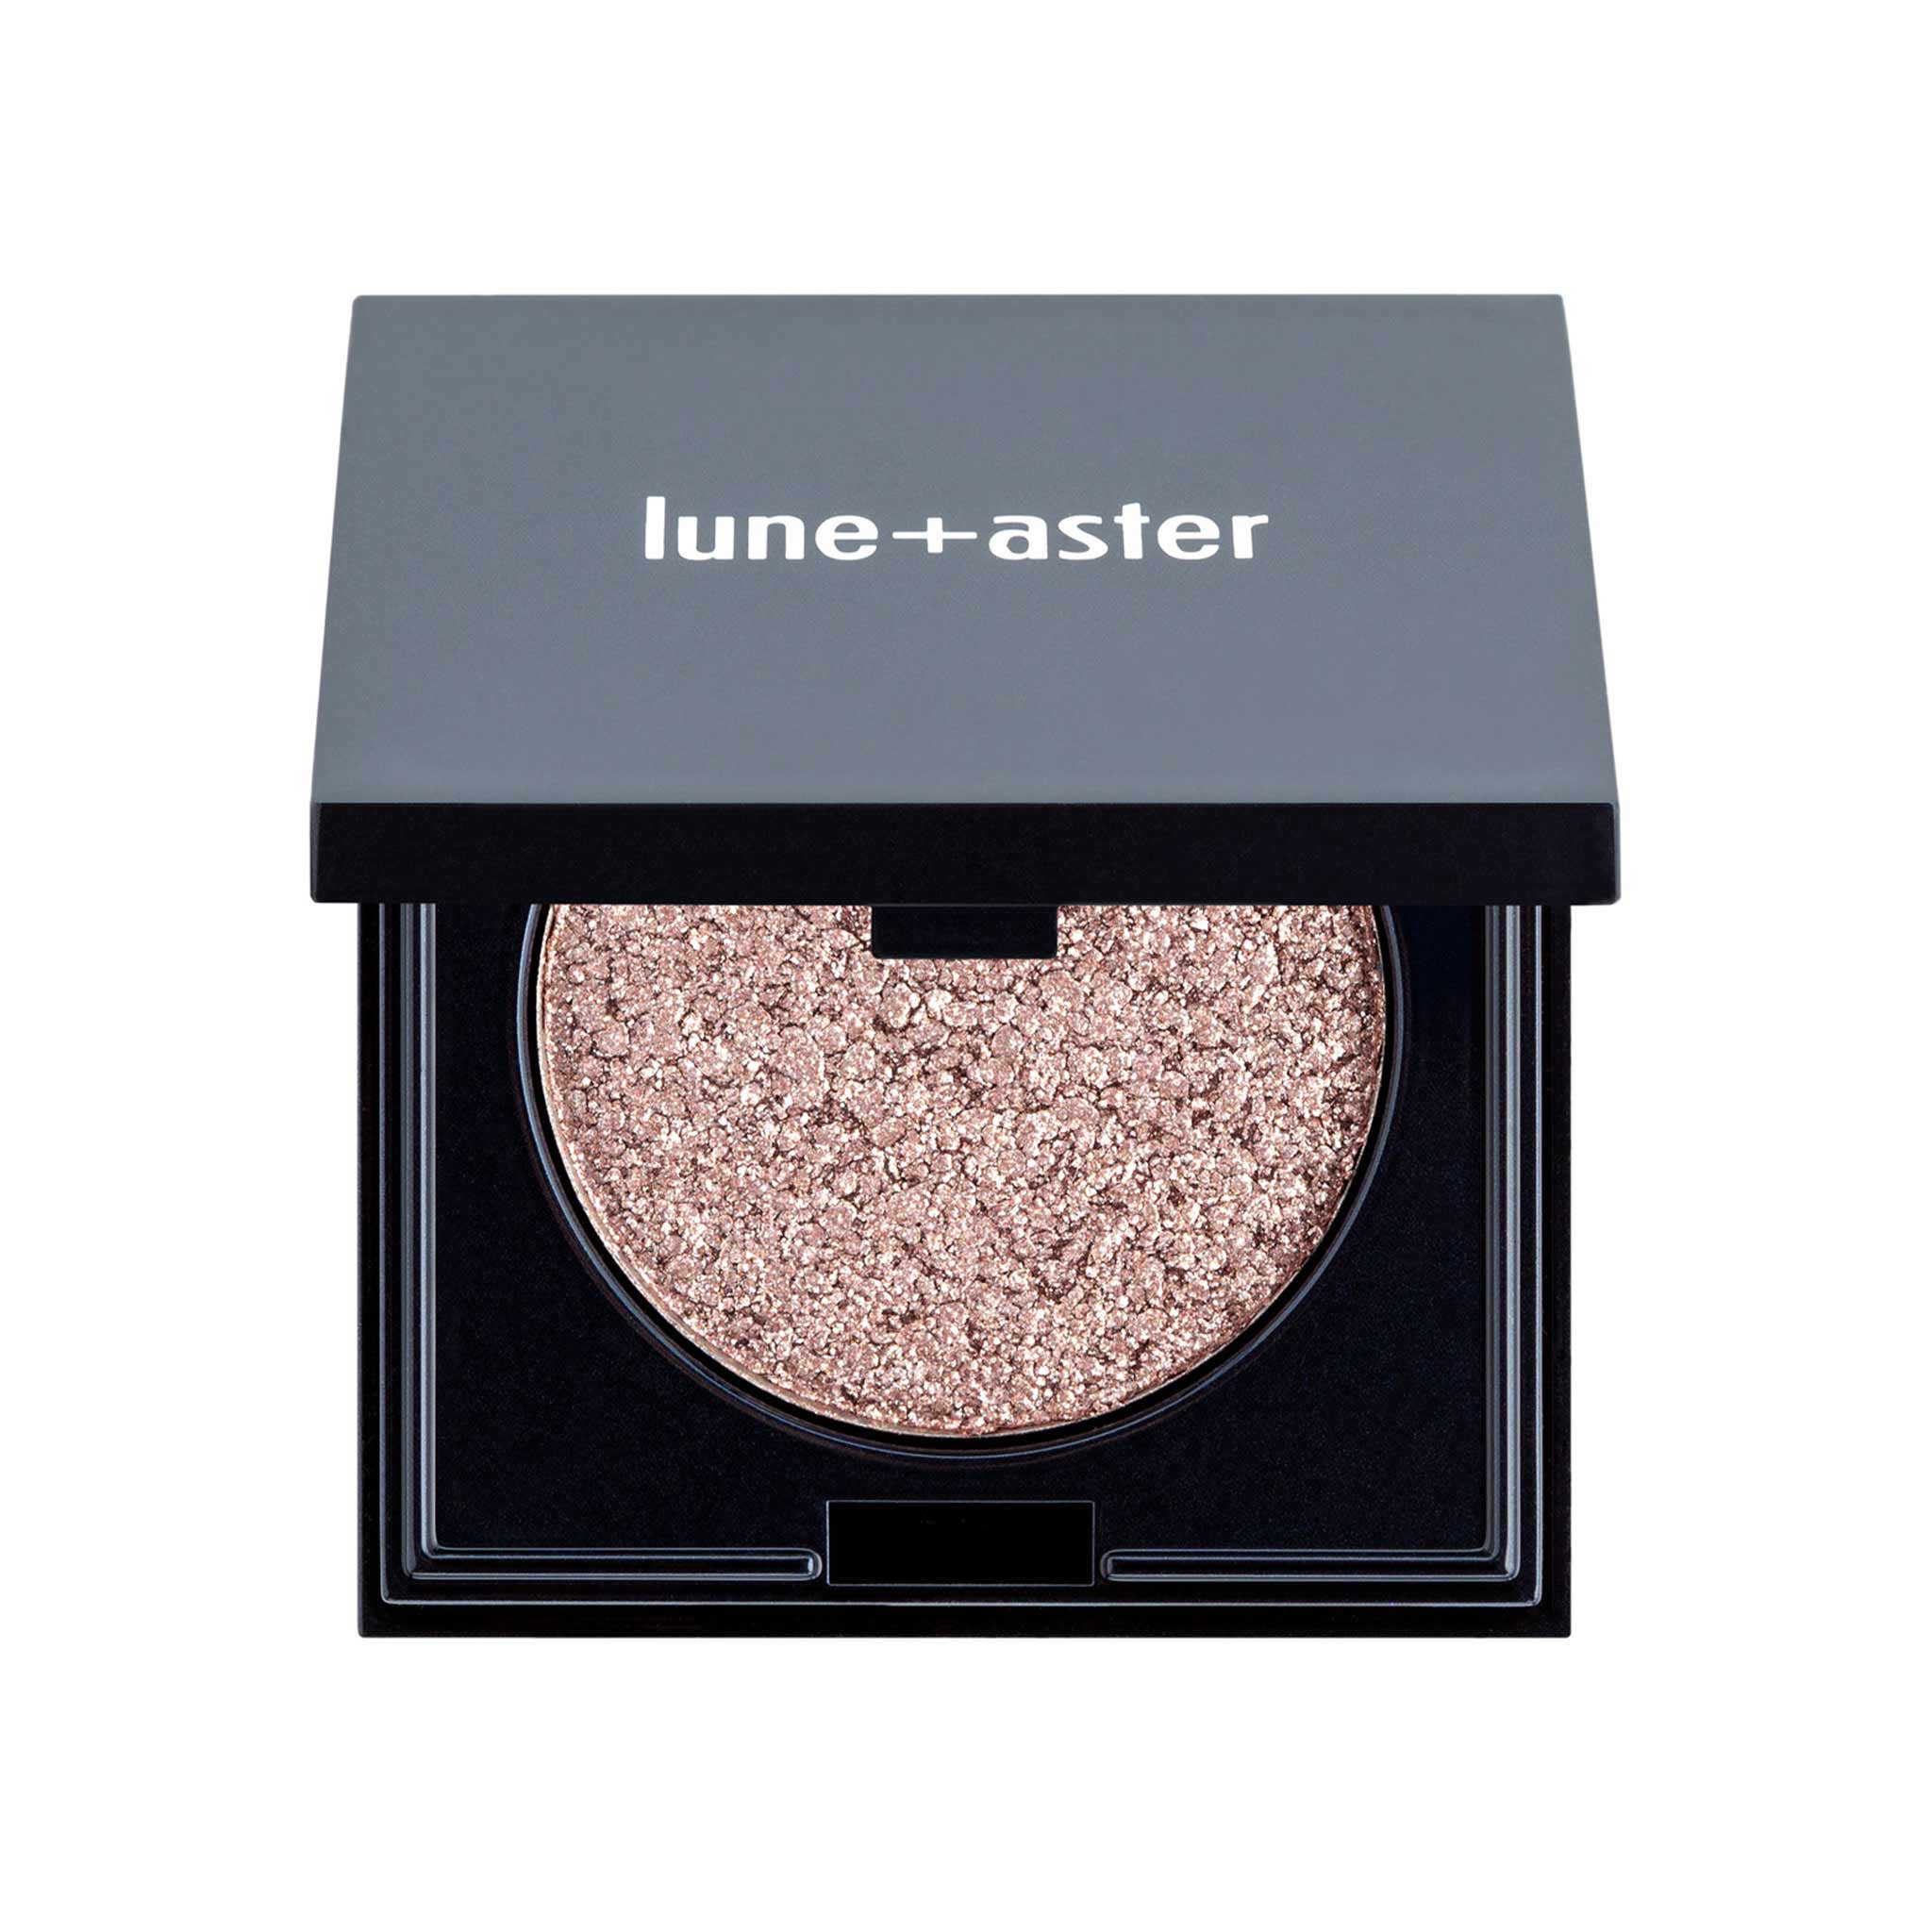 Lune+Aster StarDust Eye Pop Color/Shade variant: Smokey Topaz main image. This product is in the color bronze